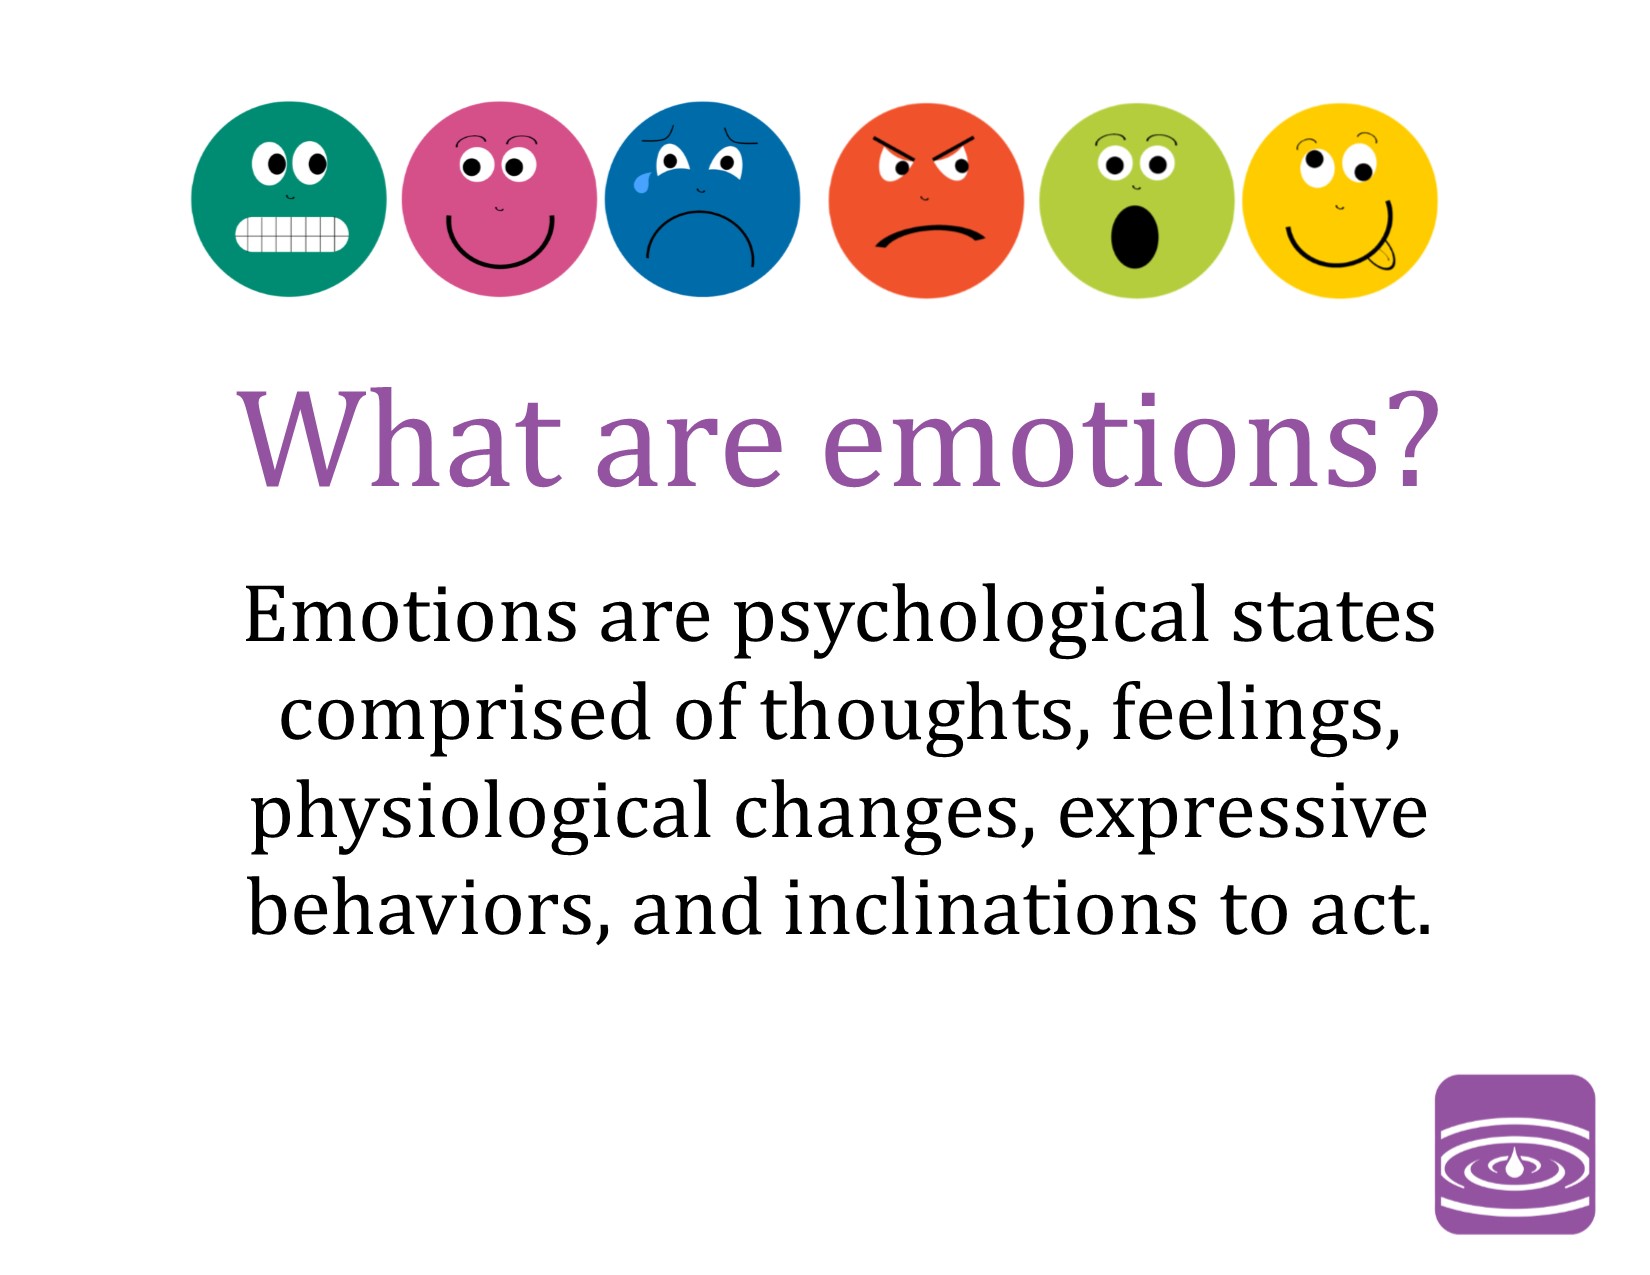 Of emotions and feelings